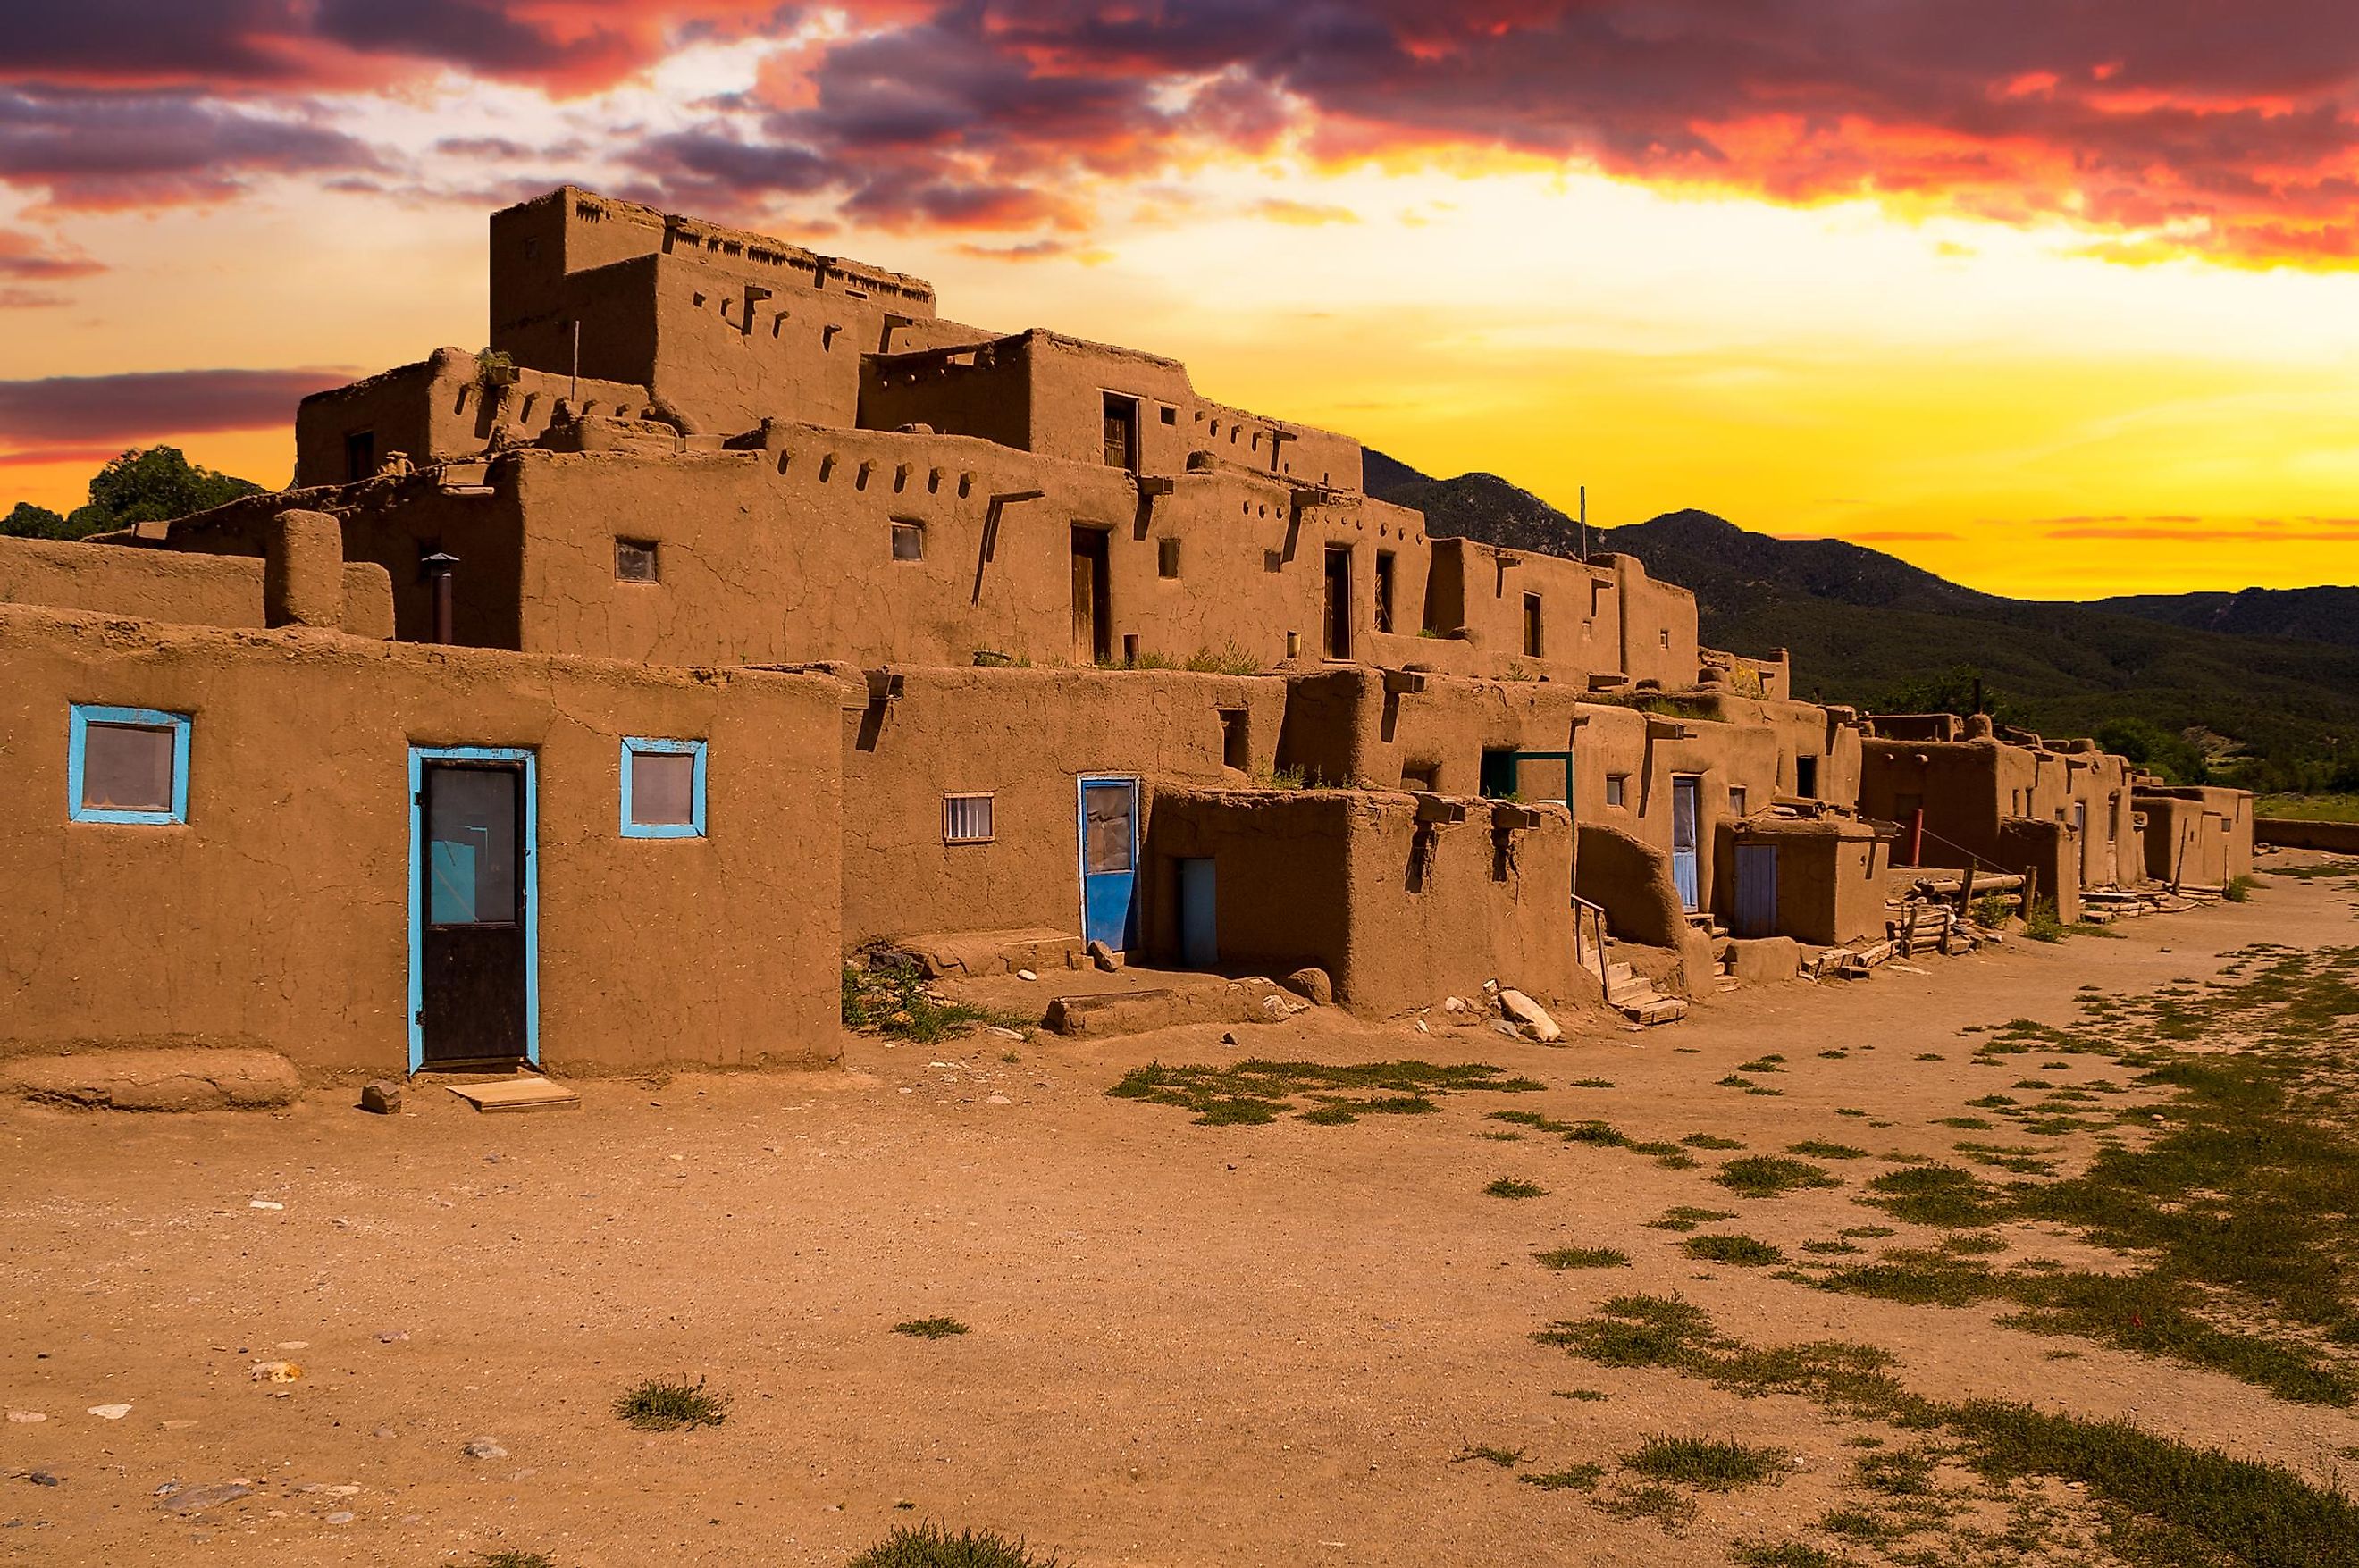 The ancient city of Taos, New Mexico, USA.